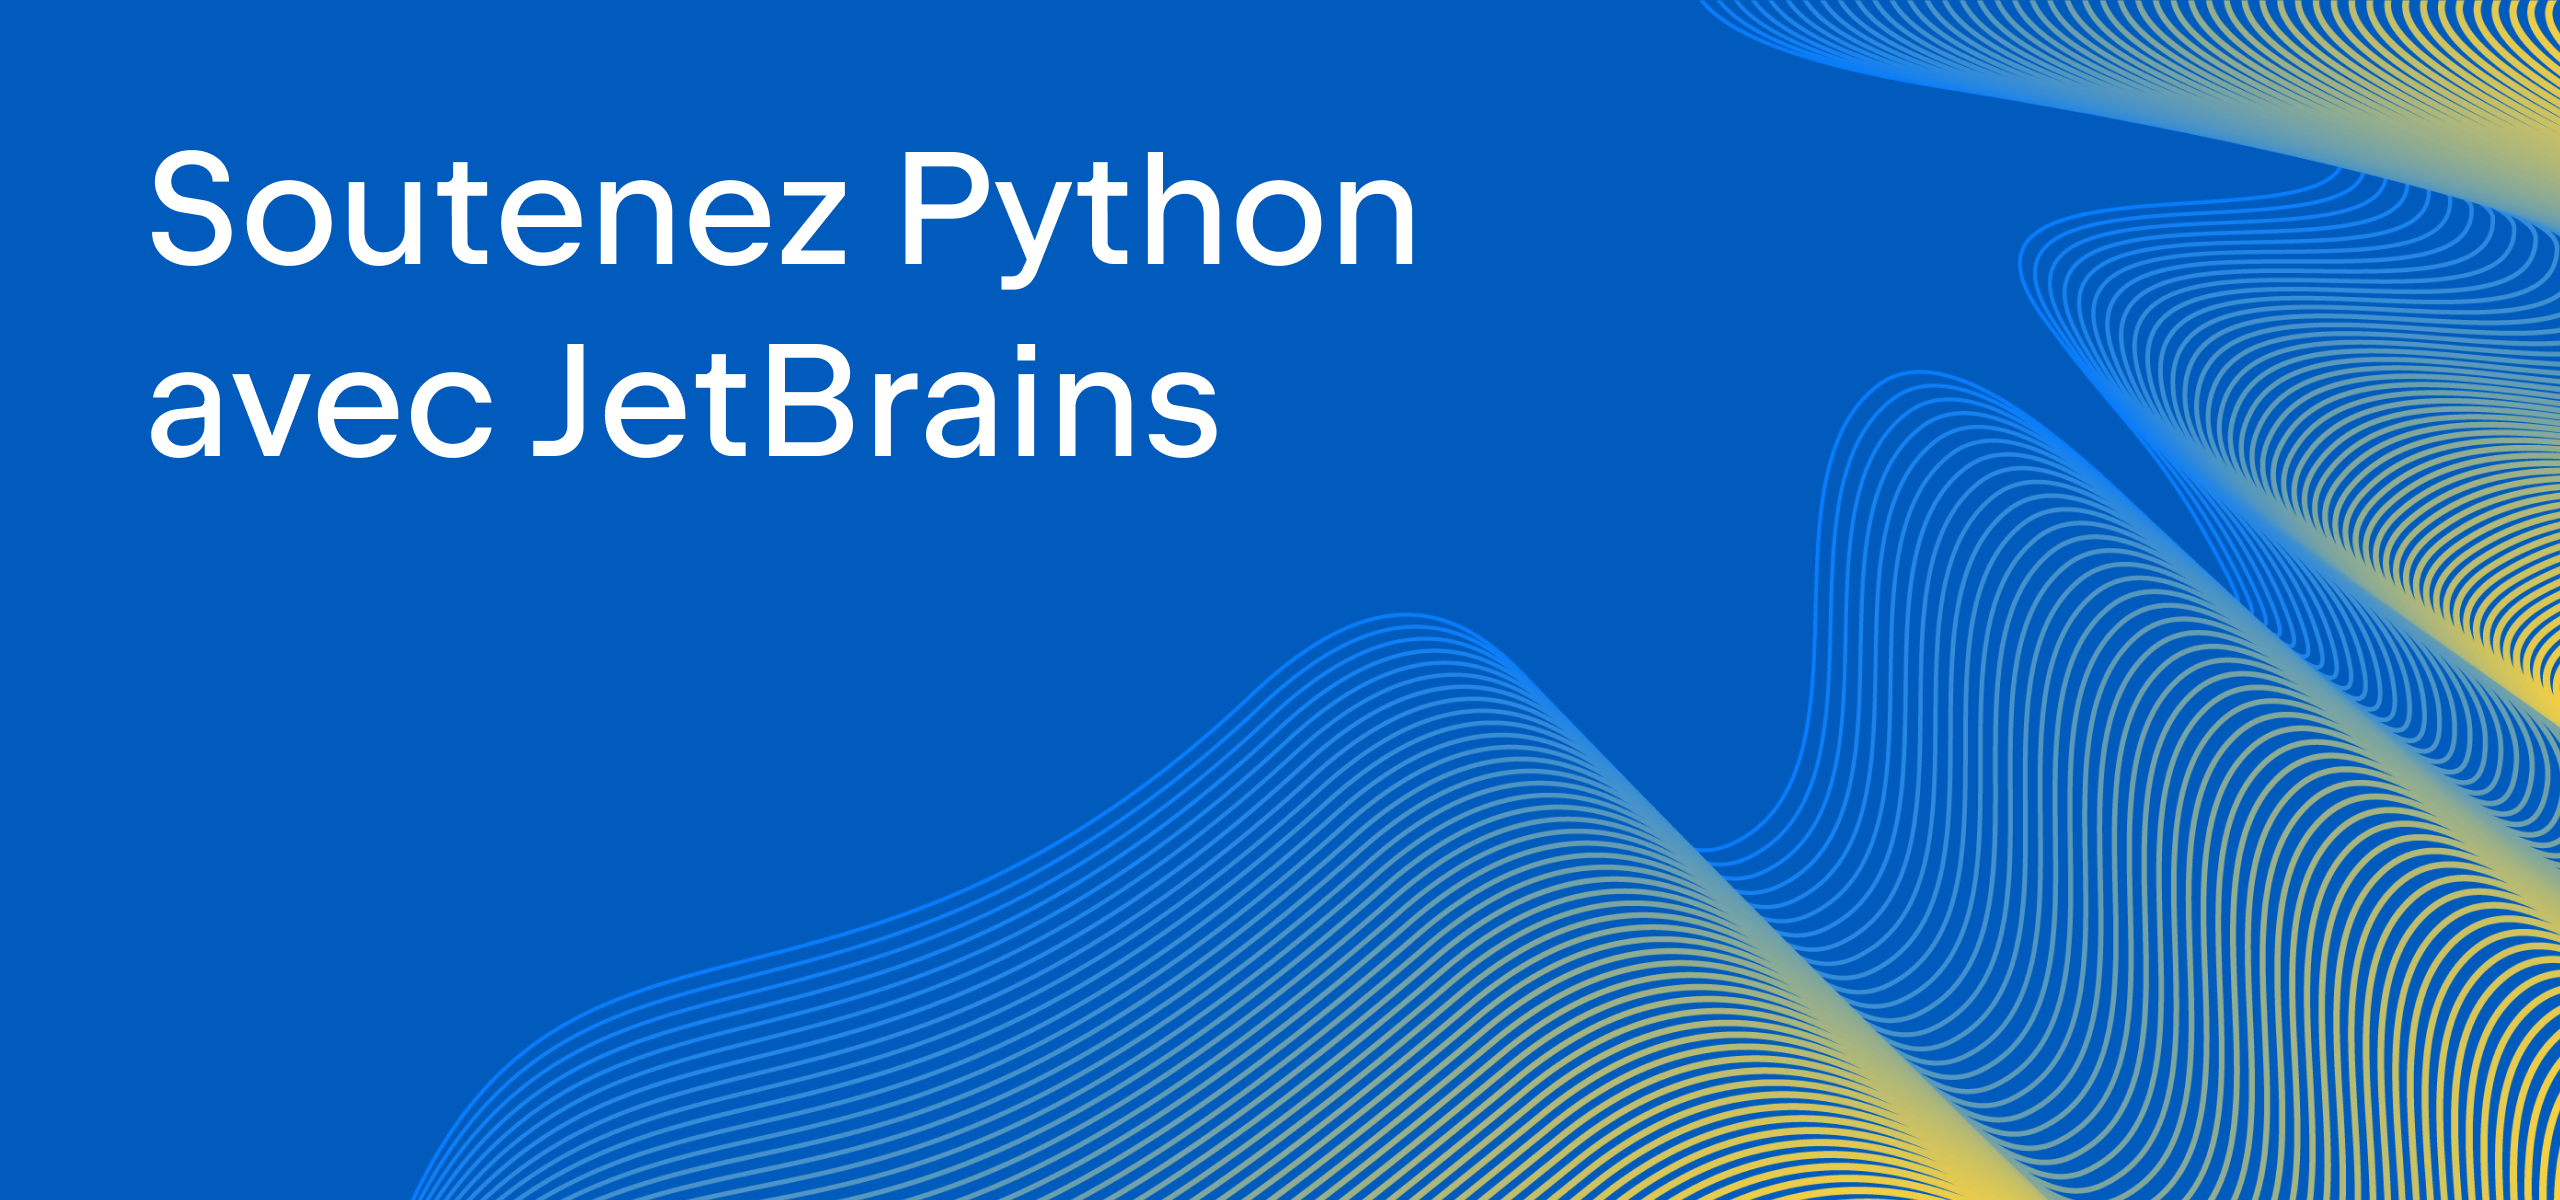 Nom : pythonjetbrains.png
Affichages : 51071
Taille : 1,21 Mo